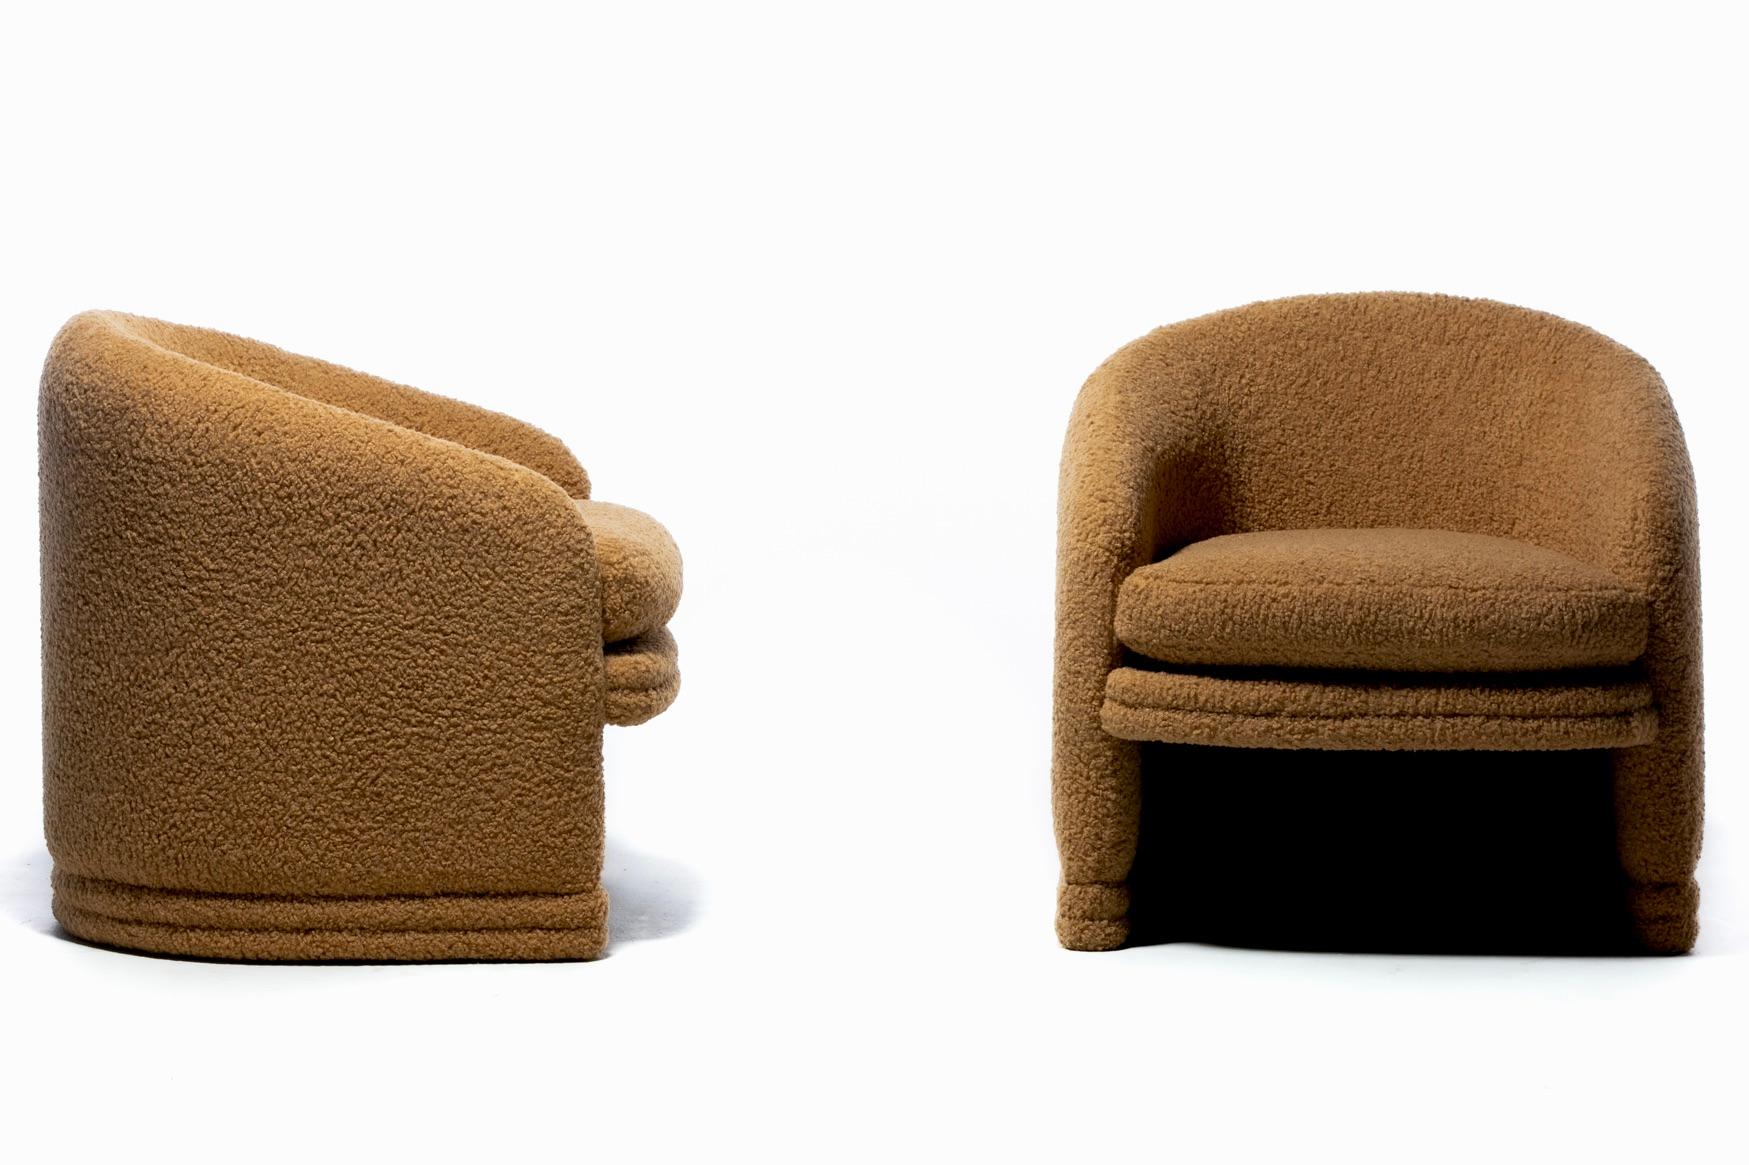 Pair of Adrian Pearsall for Comfort Designs Post Modern Club Chairs, C. 1980s For Sale 7